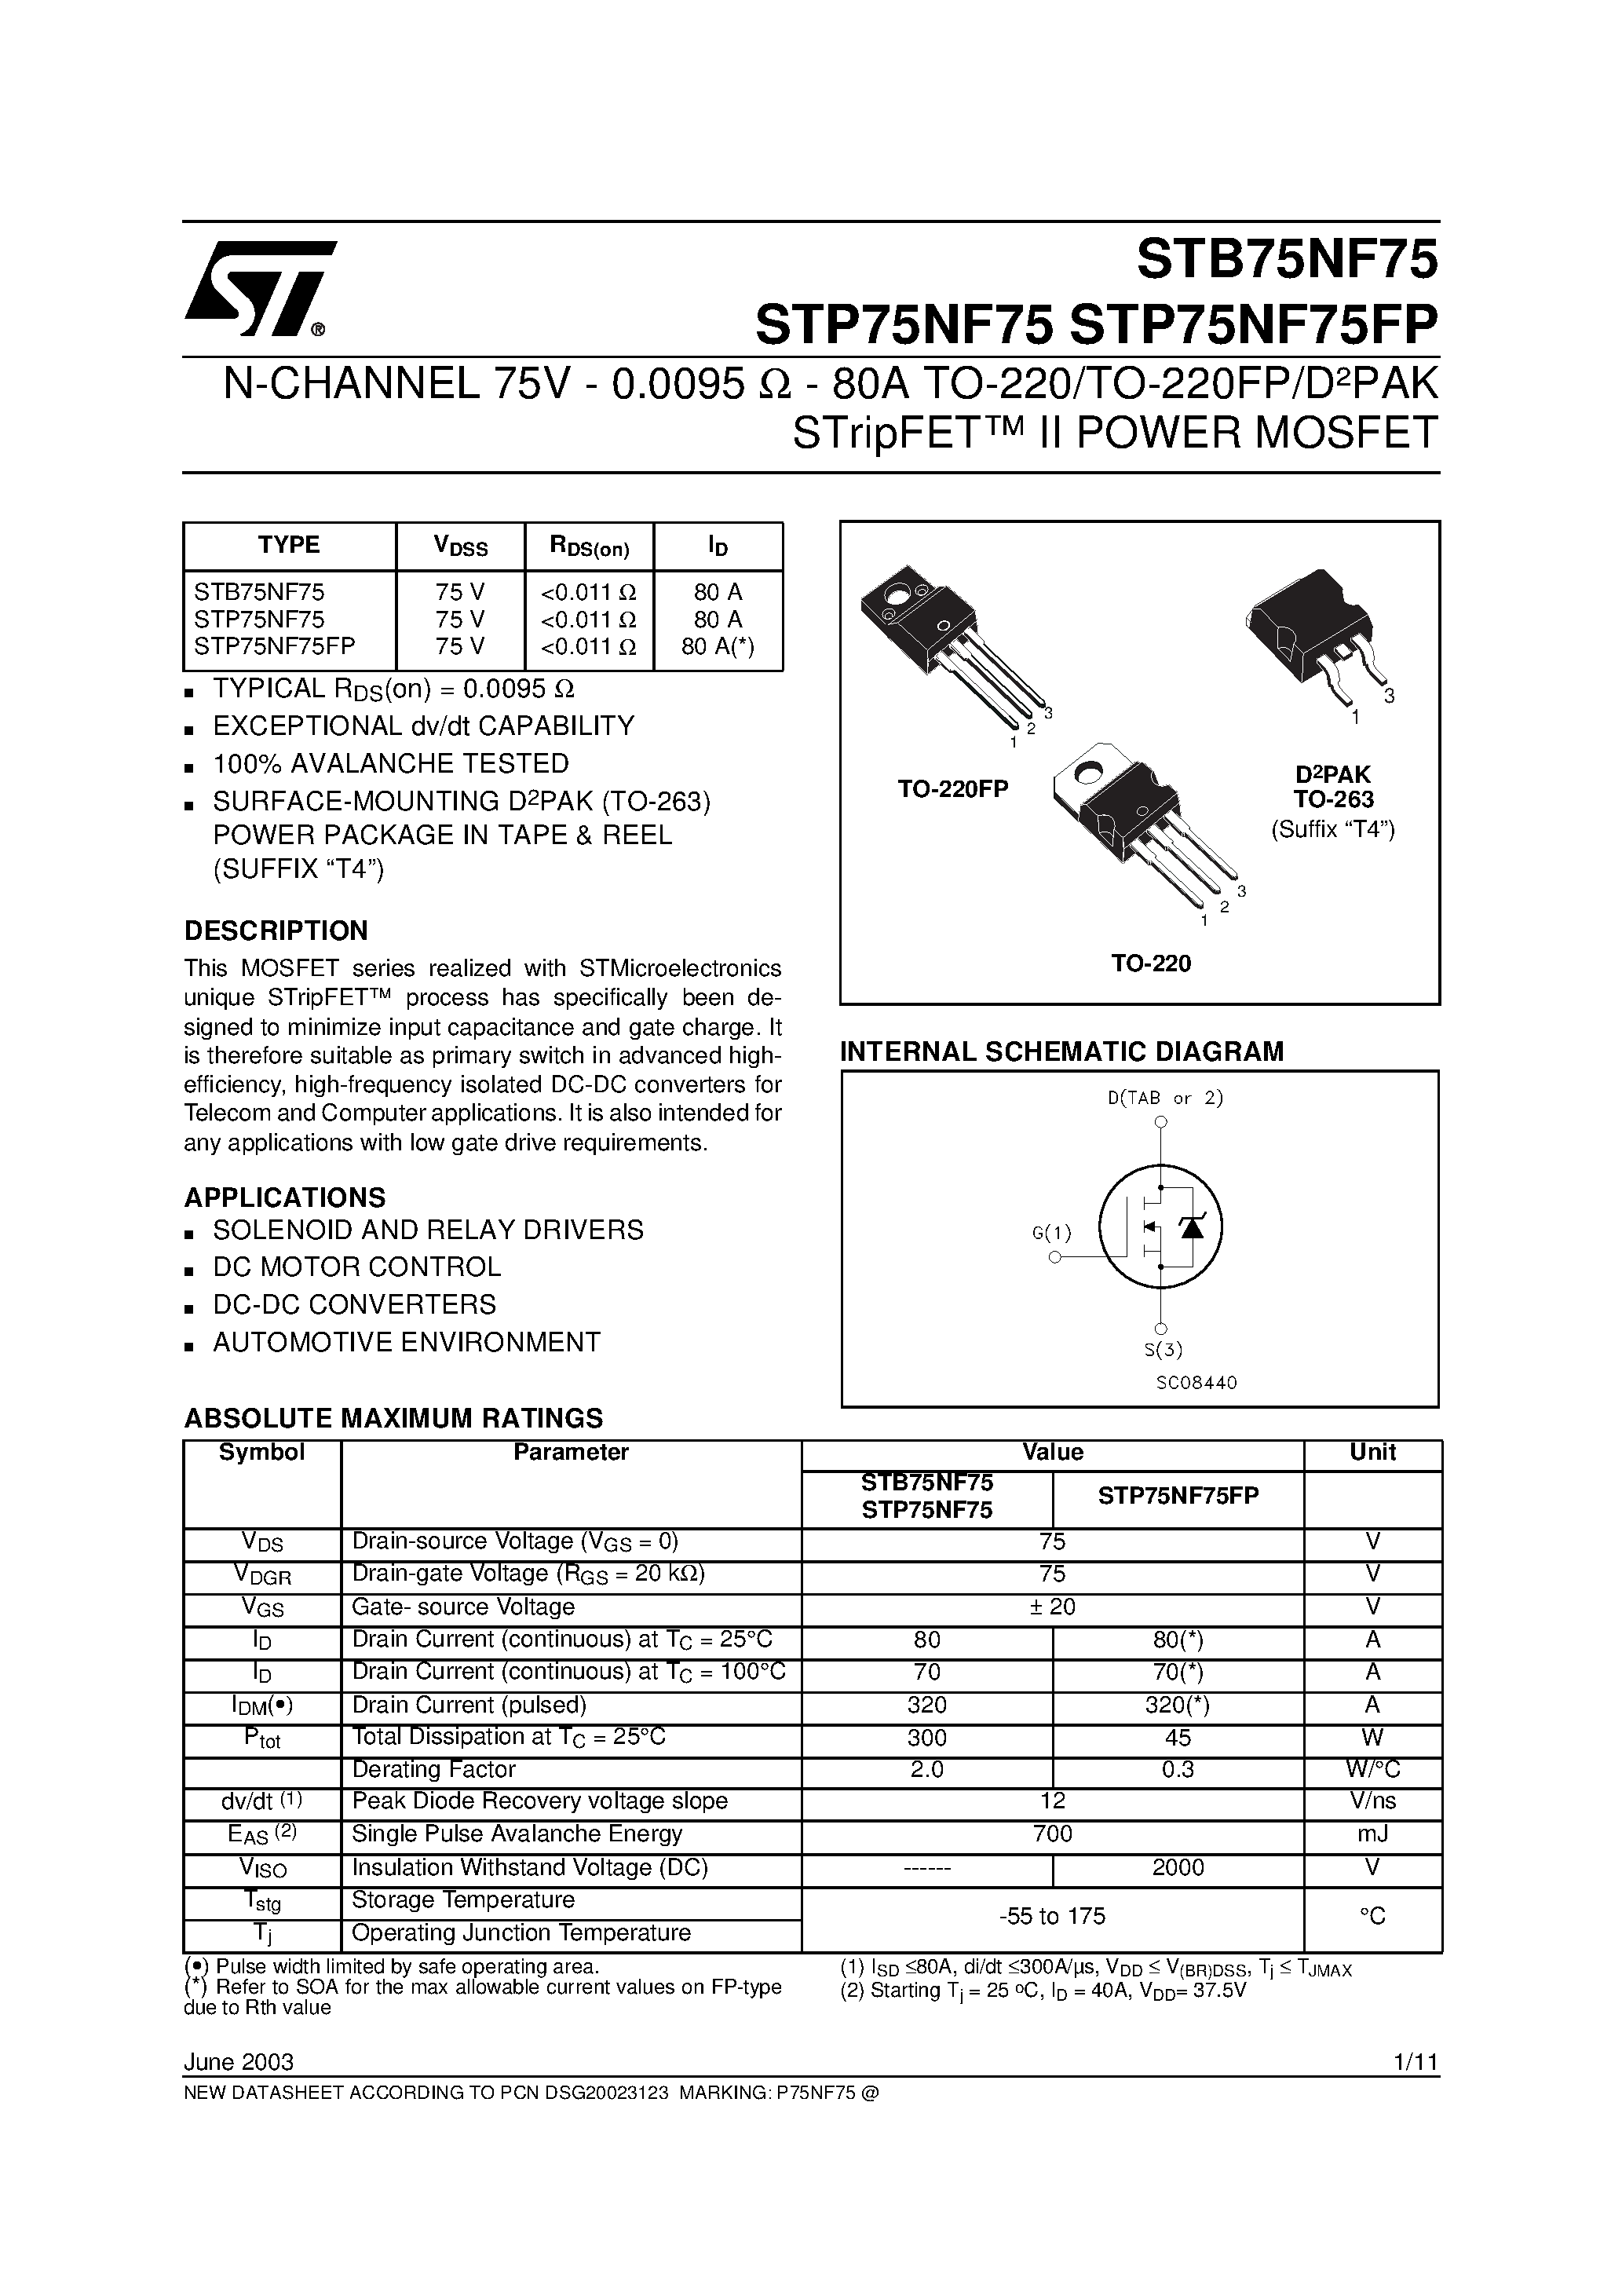 Даташит STB75NF75-N-CHANNEL MOSFET страница 1